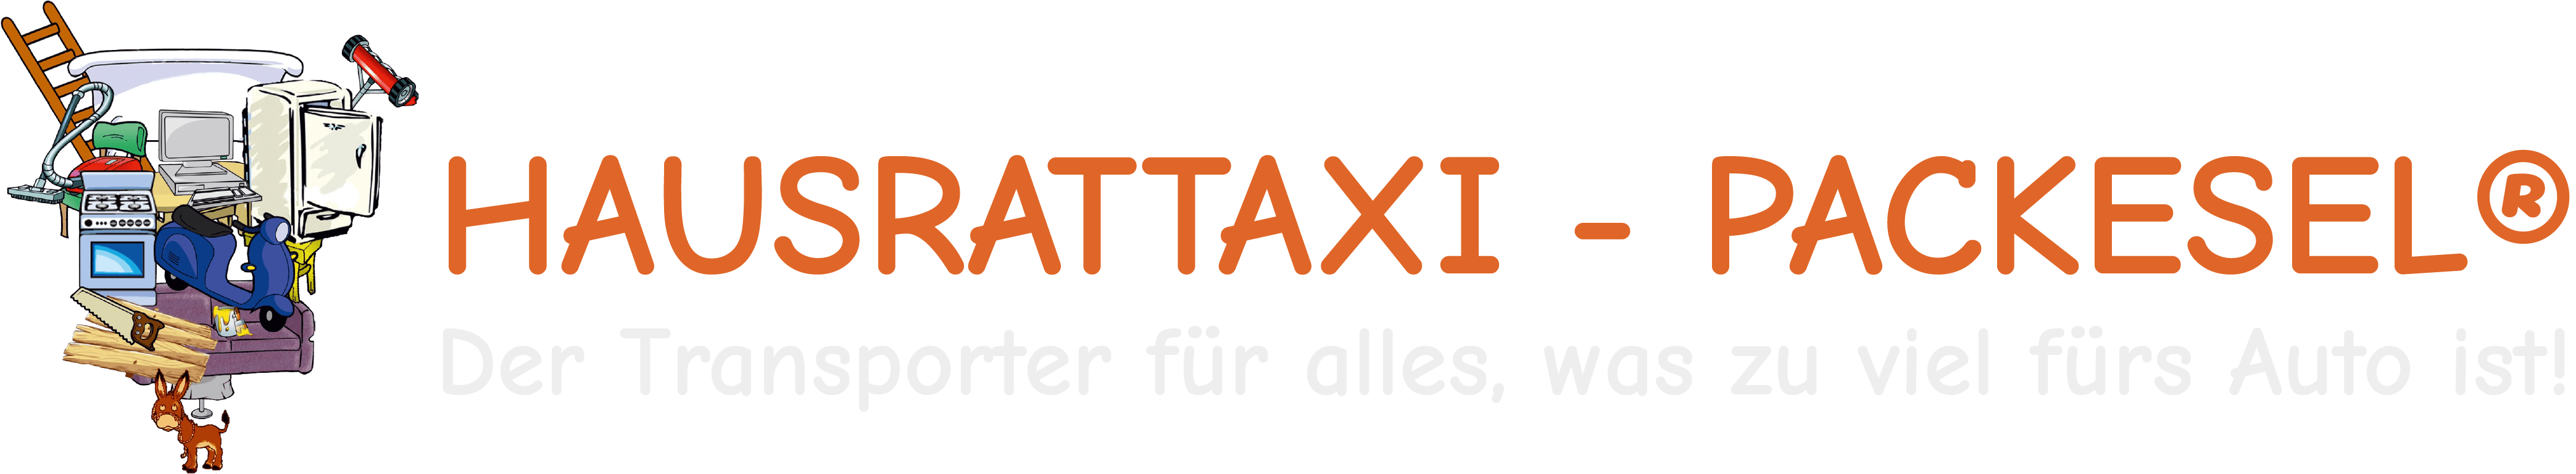 Hausrattaxi-Packesel | Magdeburg